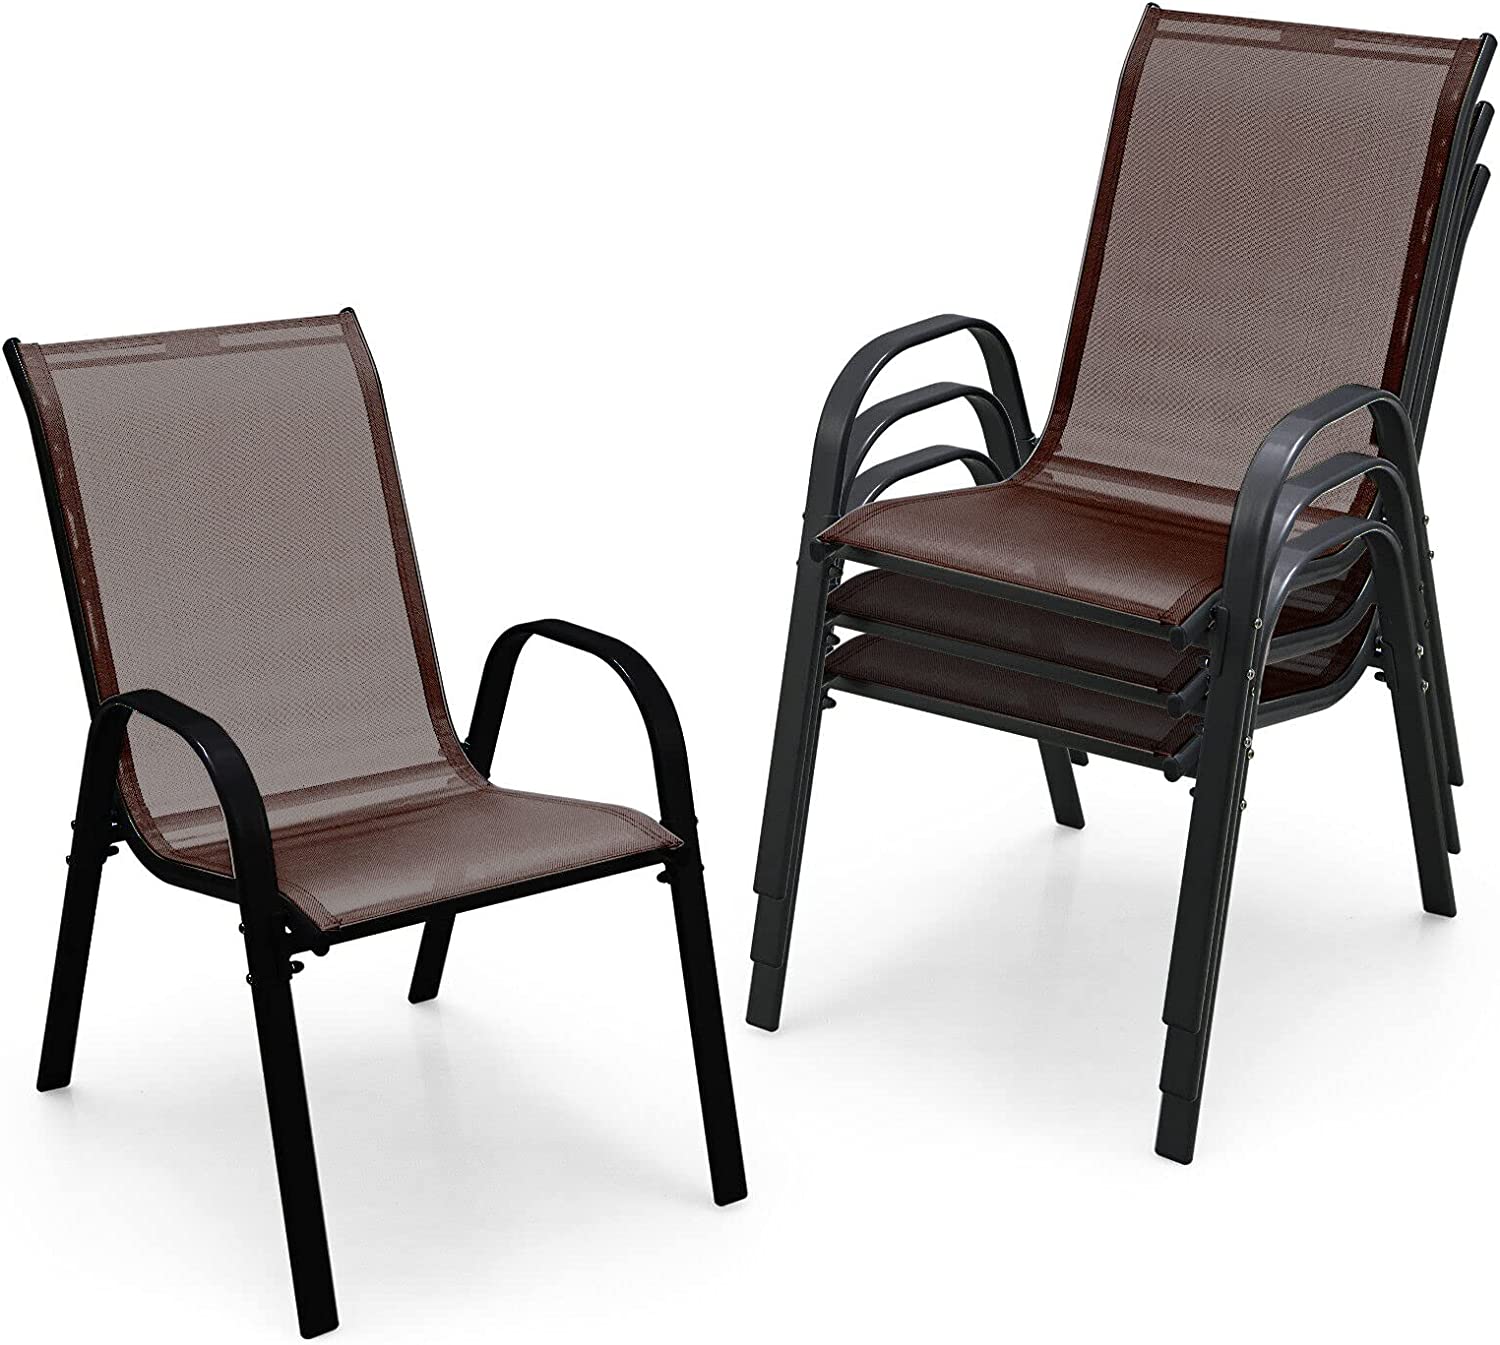 Giantex Set of 4 Patio Chairs, Outdoor Dining Chairs W/Curved Armrests